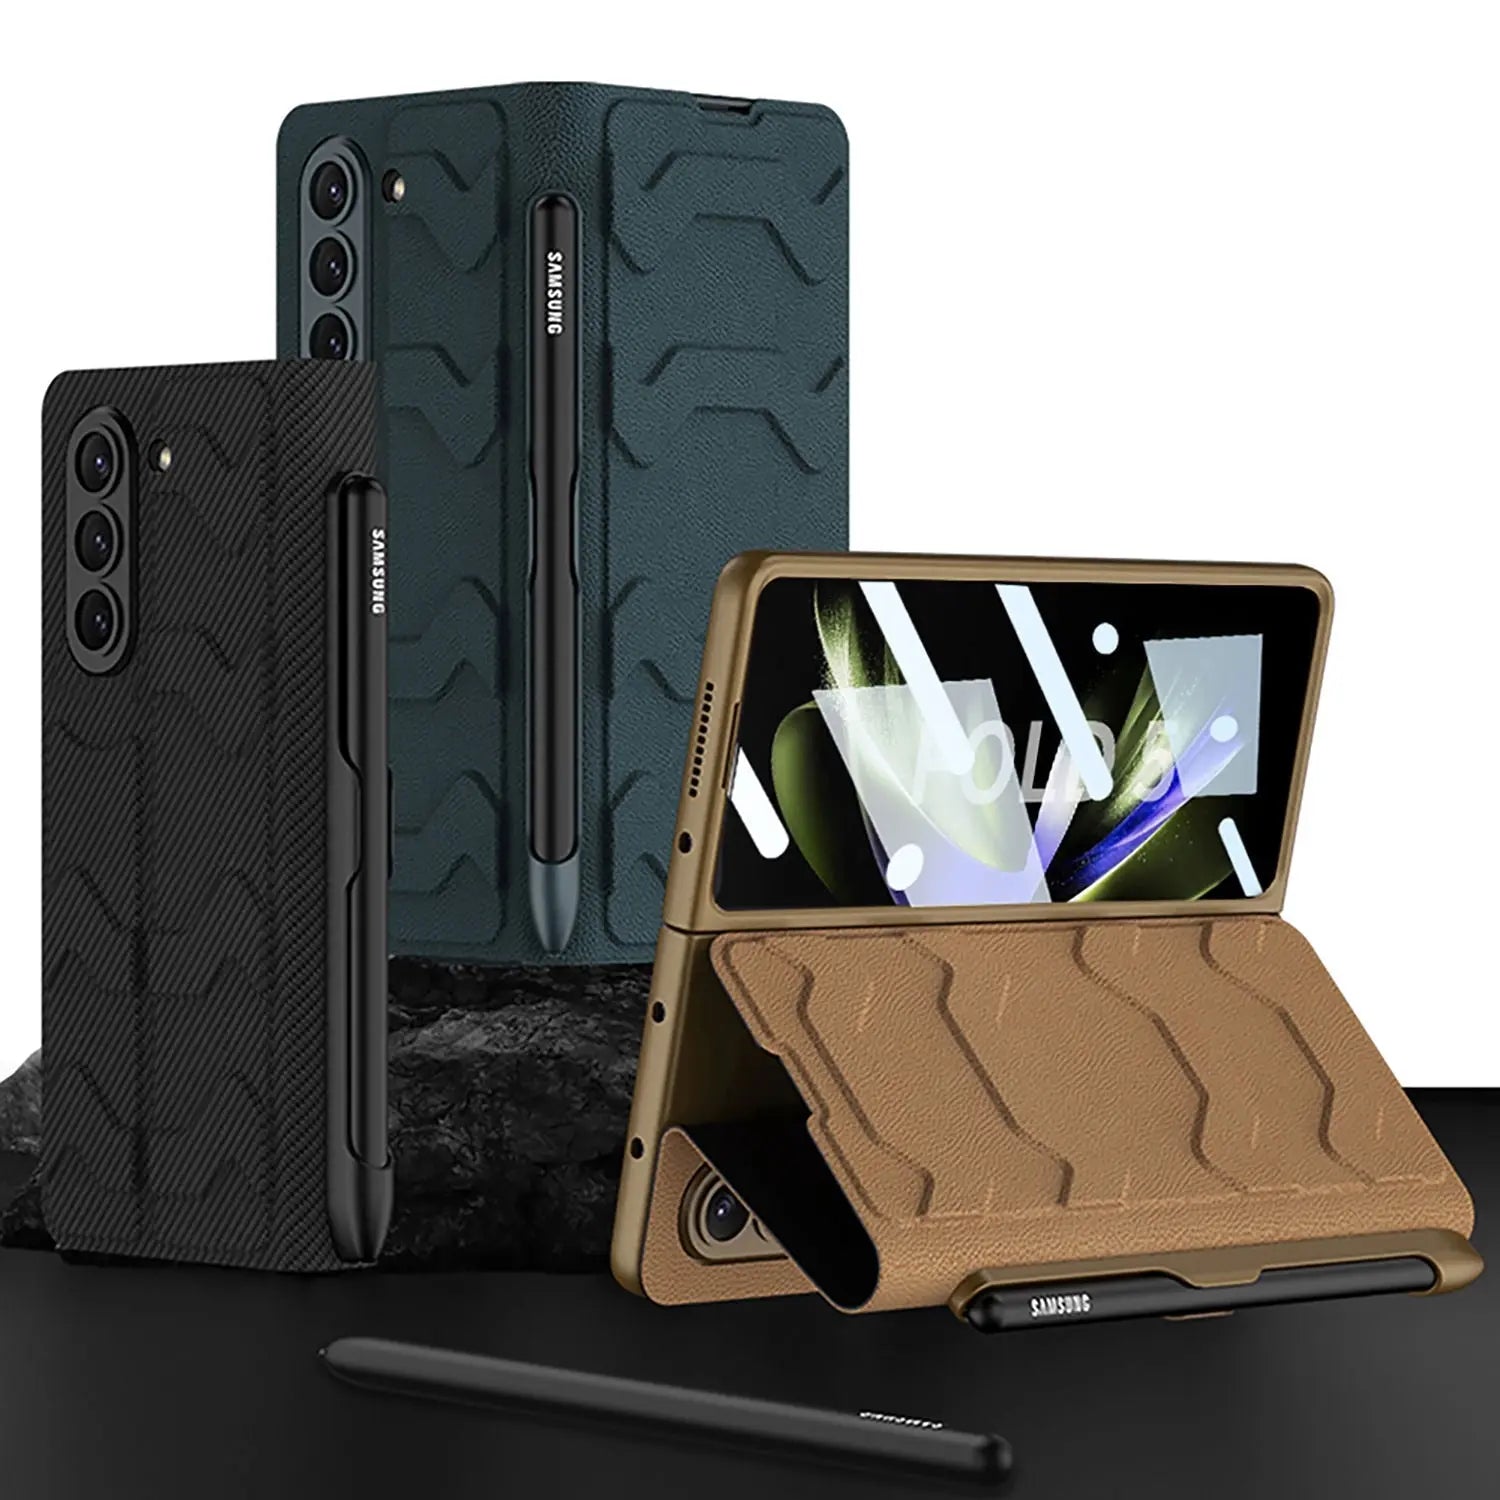 Rugged Custom Leather Case For Samsung Galaxy Z fold 5 Pinnacle Luxuries